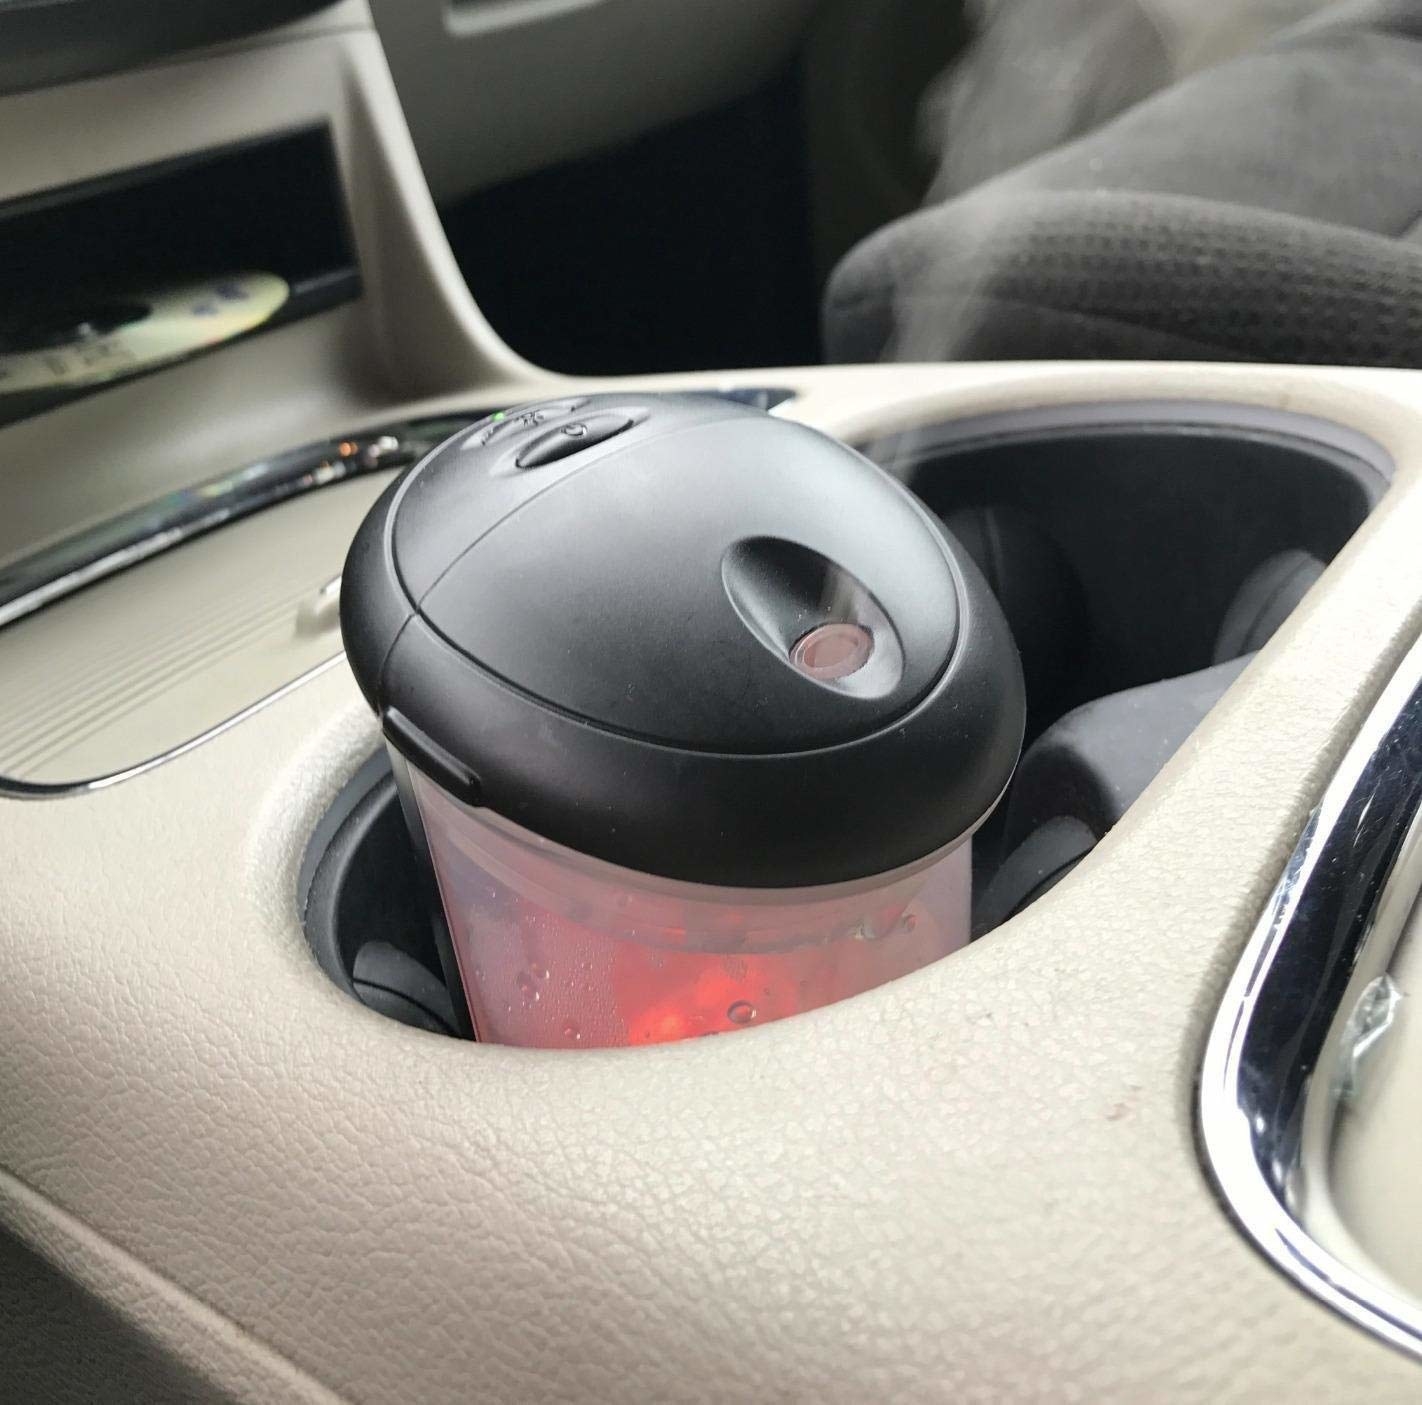 7 Times To Avoid Cheap Car Accessories and Splurge Instead